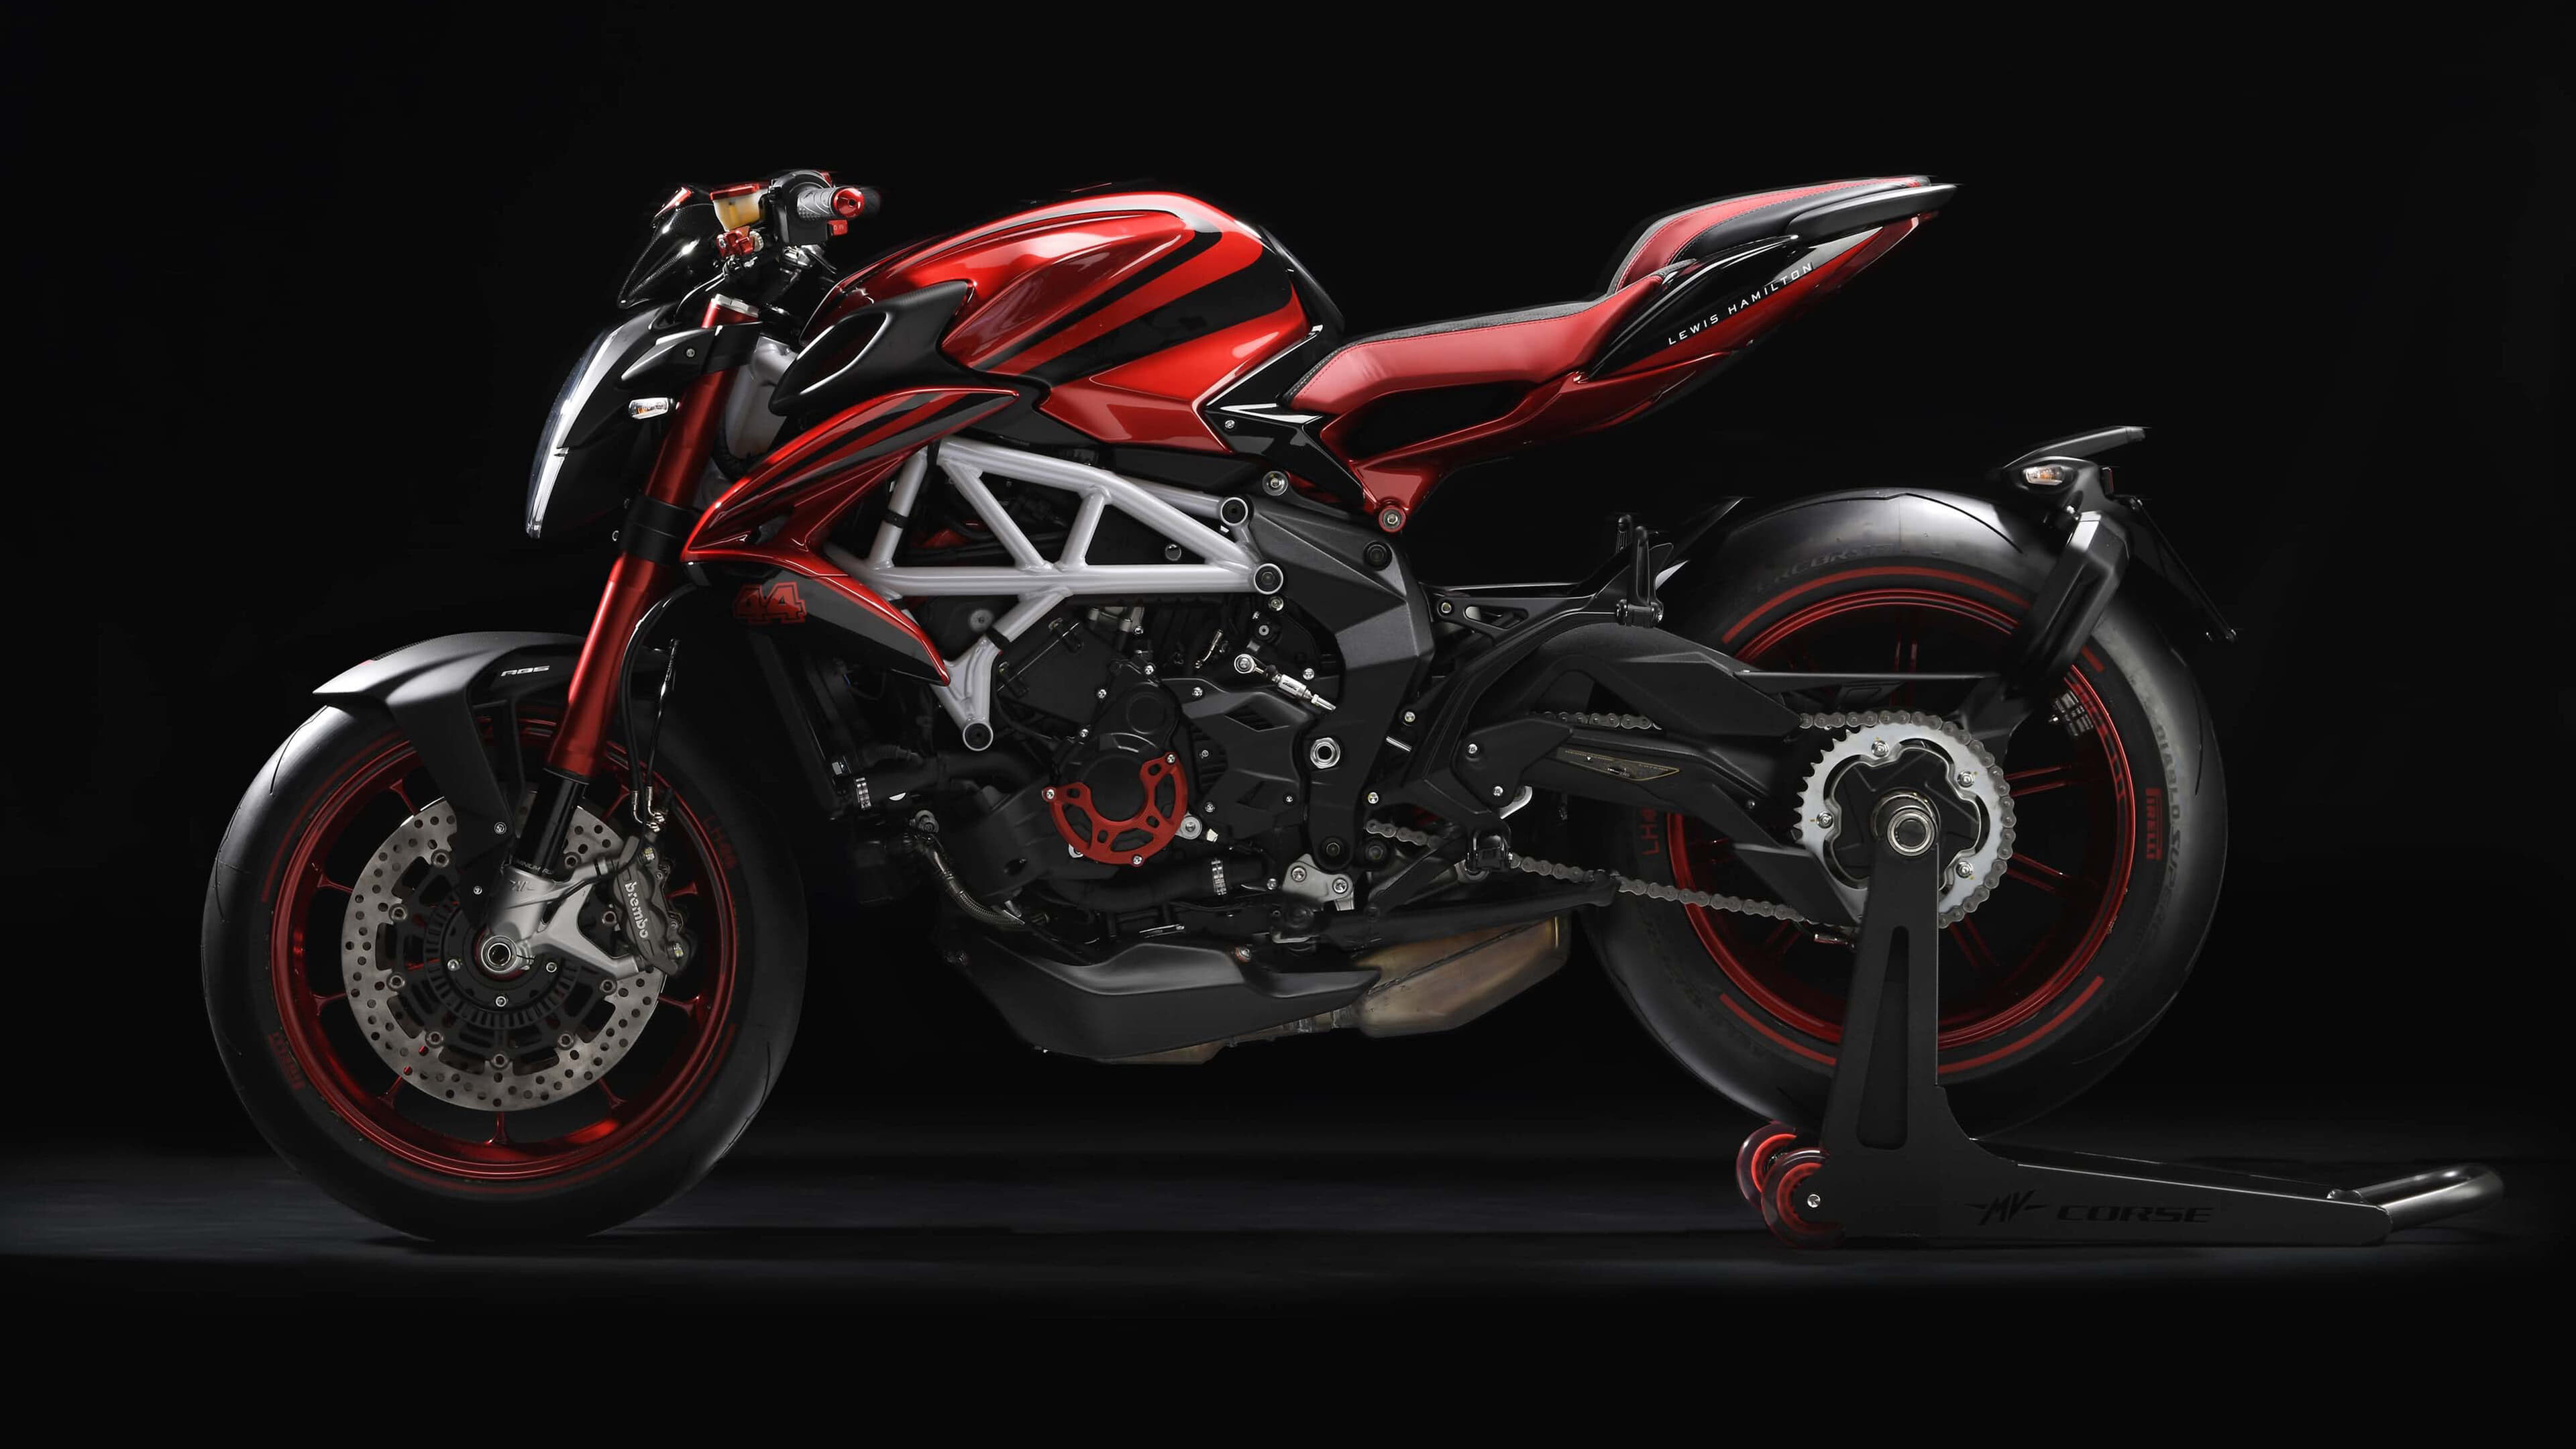 MV Agusta: Brutale 800 RR LH44, A four-cylinder 998 cubic centimeter engine with low-friction technology. 3840x2160 4K Wallpaper.